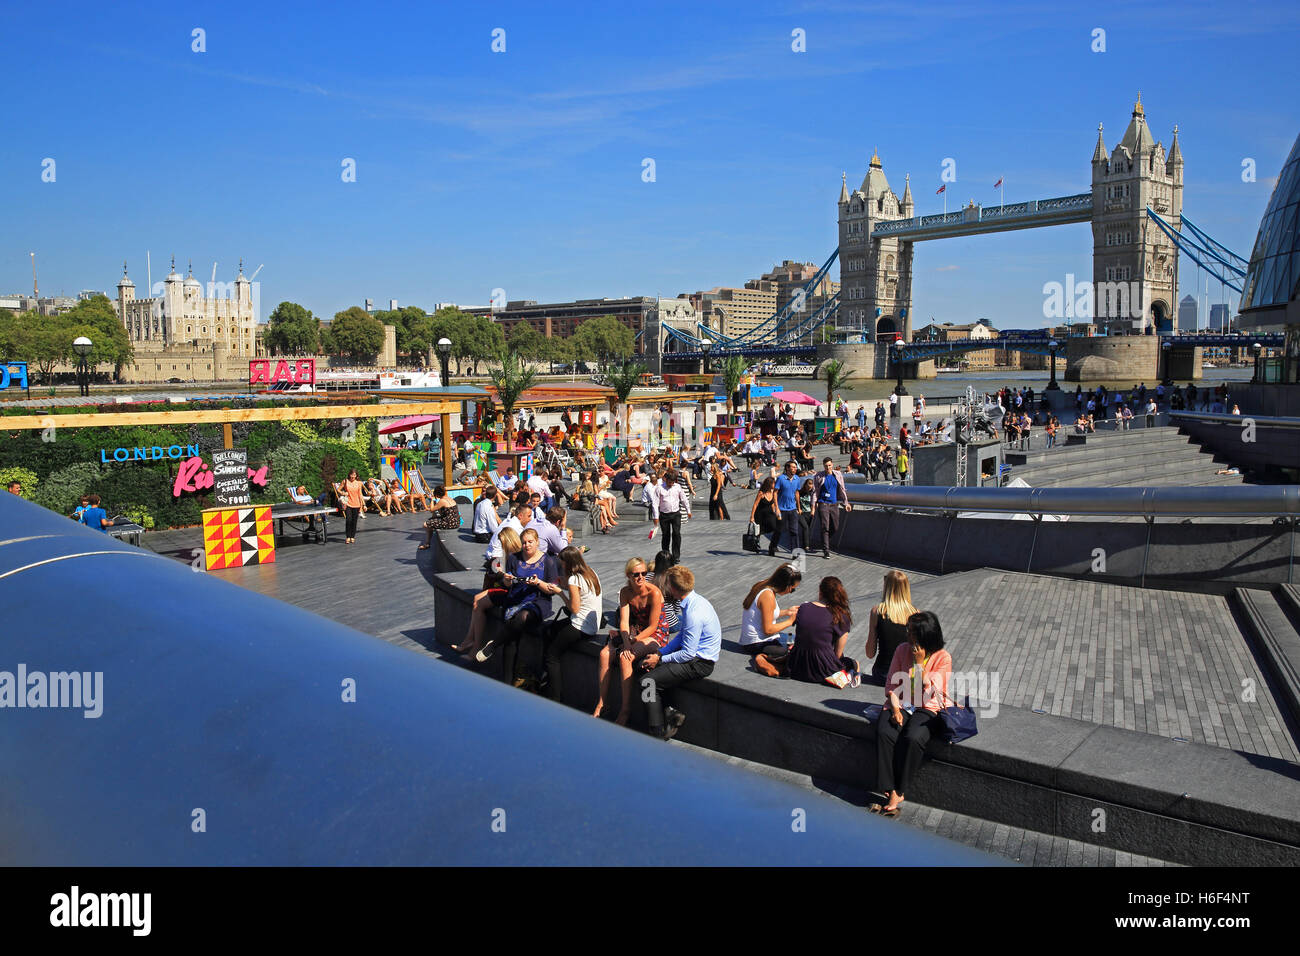 London Riviera, the summer pop up bar and kitchen, at More London Riverside, next to Tower Bridge, in Southwark, England, UK Stock Photo